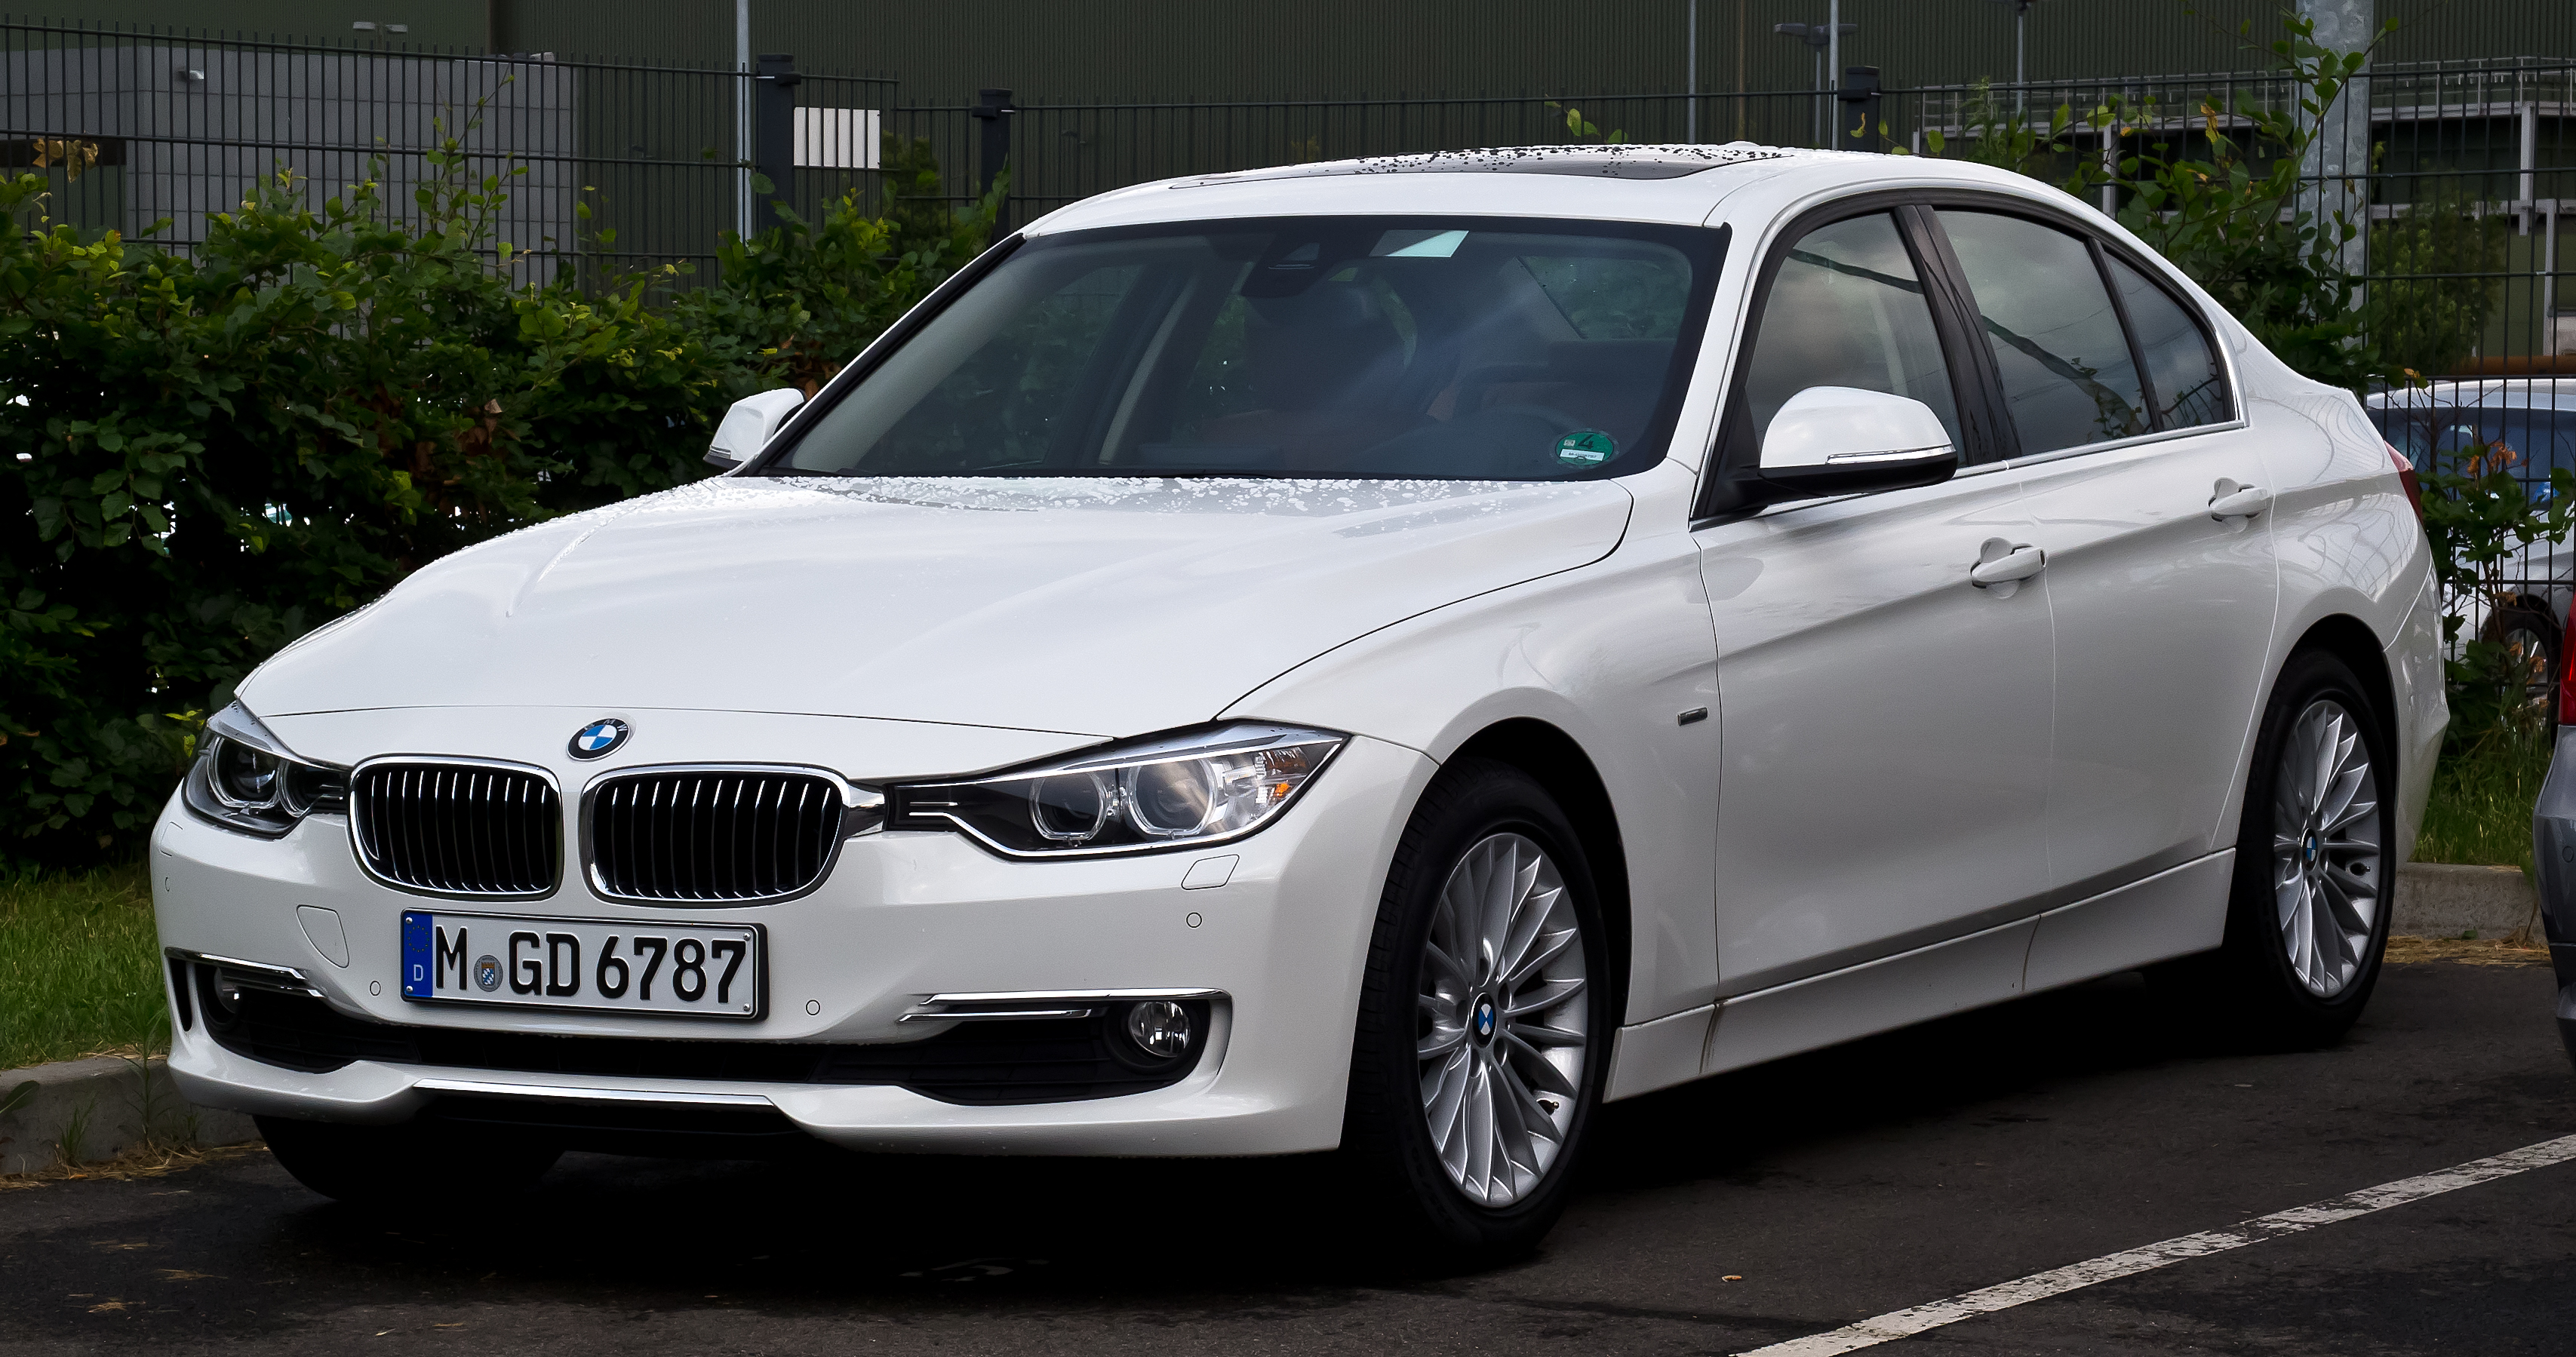 File:BMW 316i (F30) registered May 2013 1598cc 02.JPG - Simple English  Wikipedia, the free encyclopedia